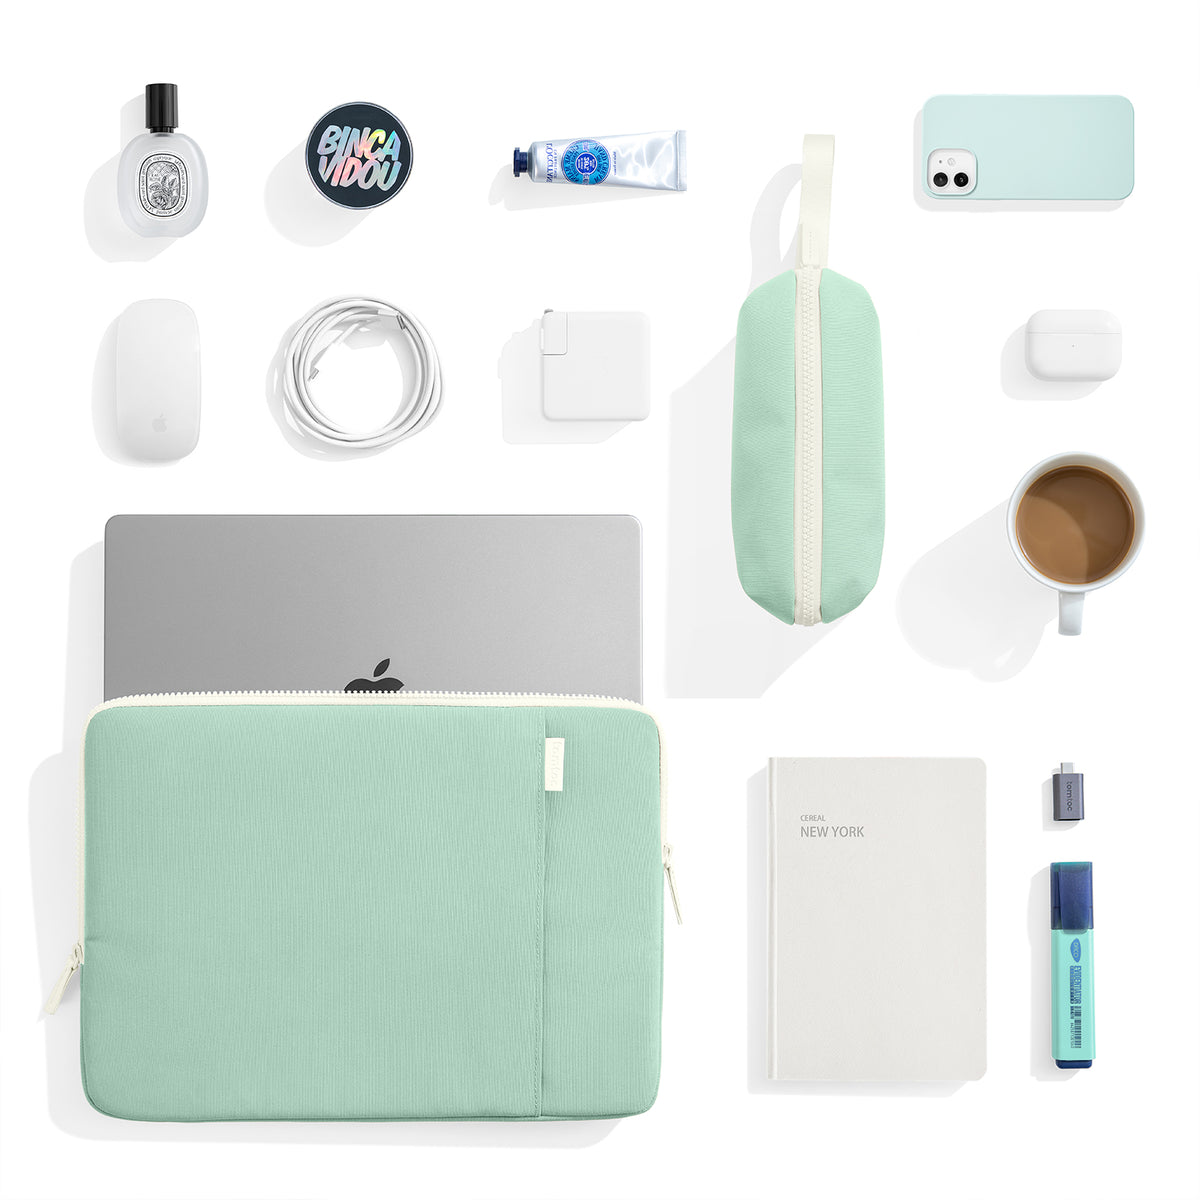 secondary_Defender-A23 Jelly Laptop Sleeve Kit for 14-inch MacBook Pro M1 Pro/Max A2442 2021 | Green